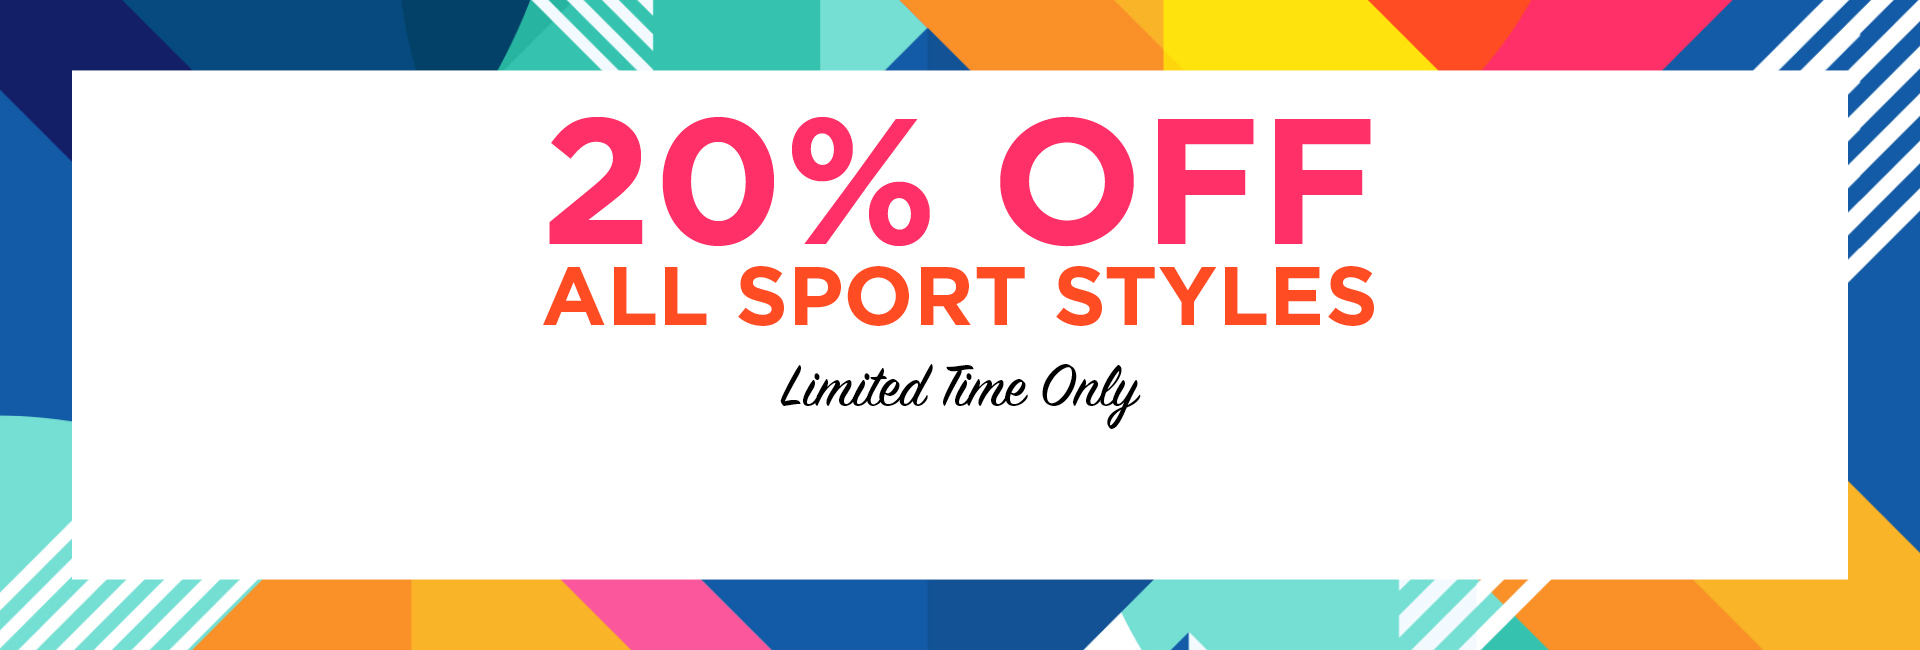 20% OFF on all sport styles